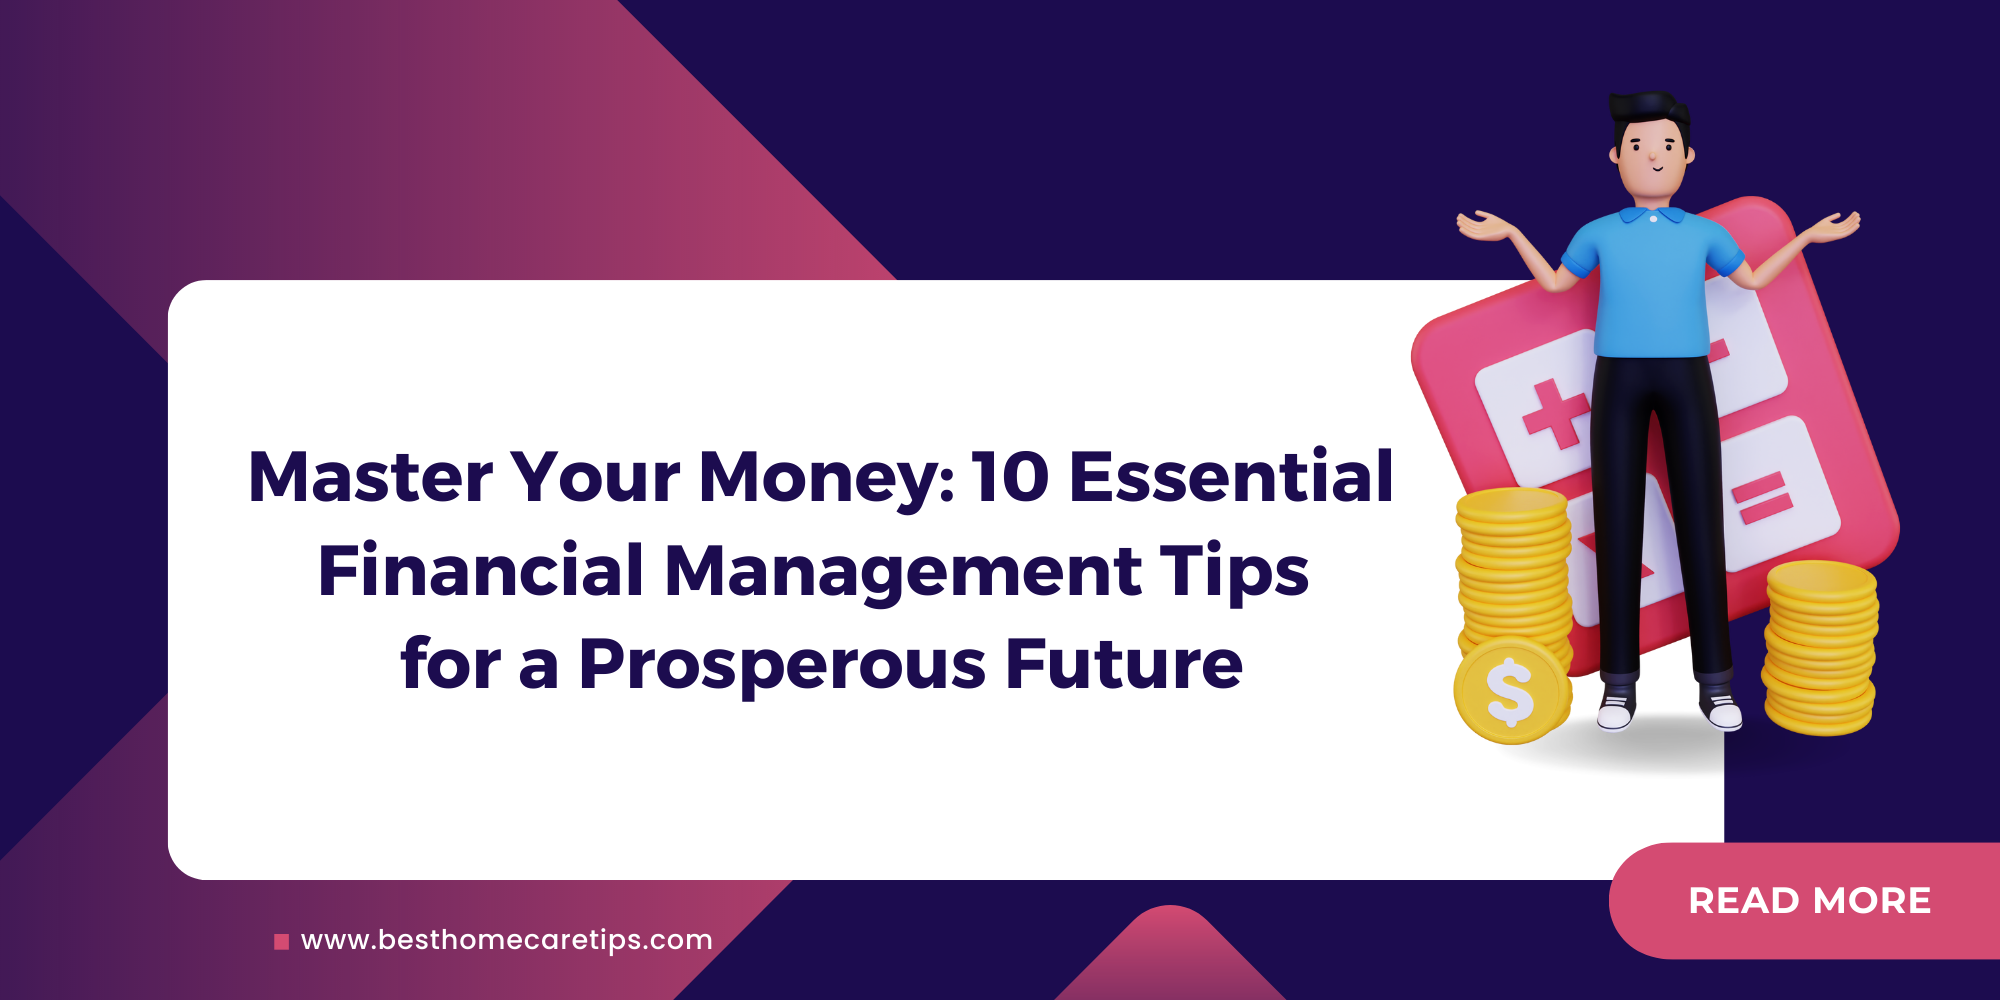 Master Your Money: 10 Essential Financial Management Tips